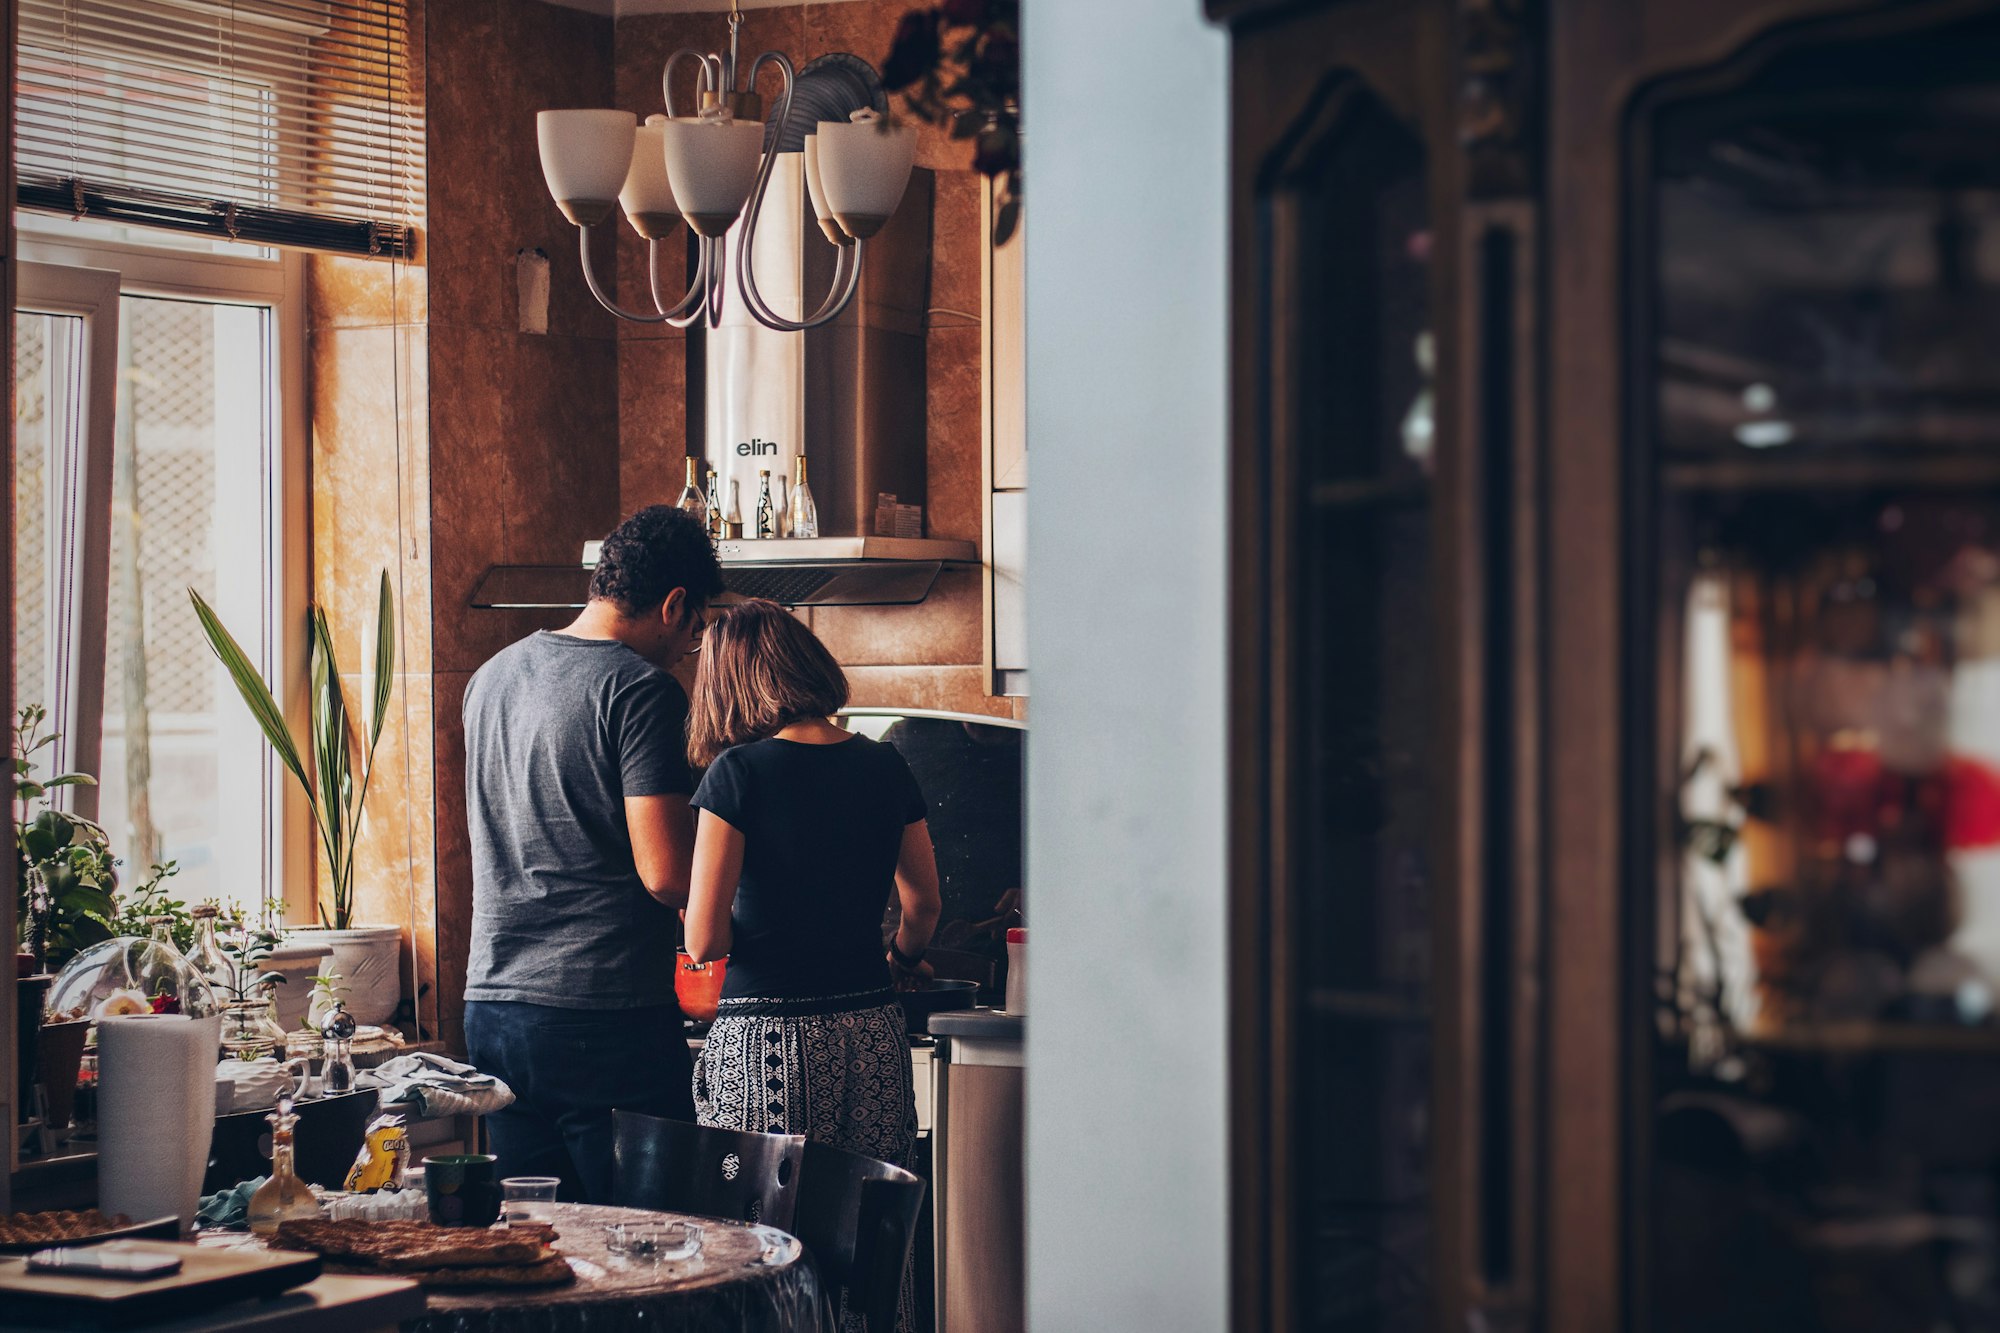 Couple working together in the kitchen.